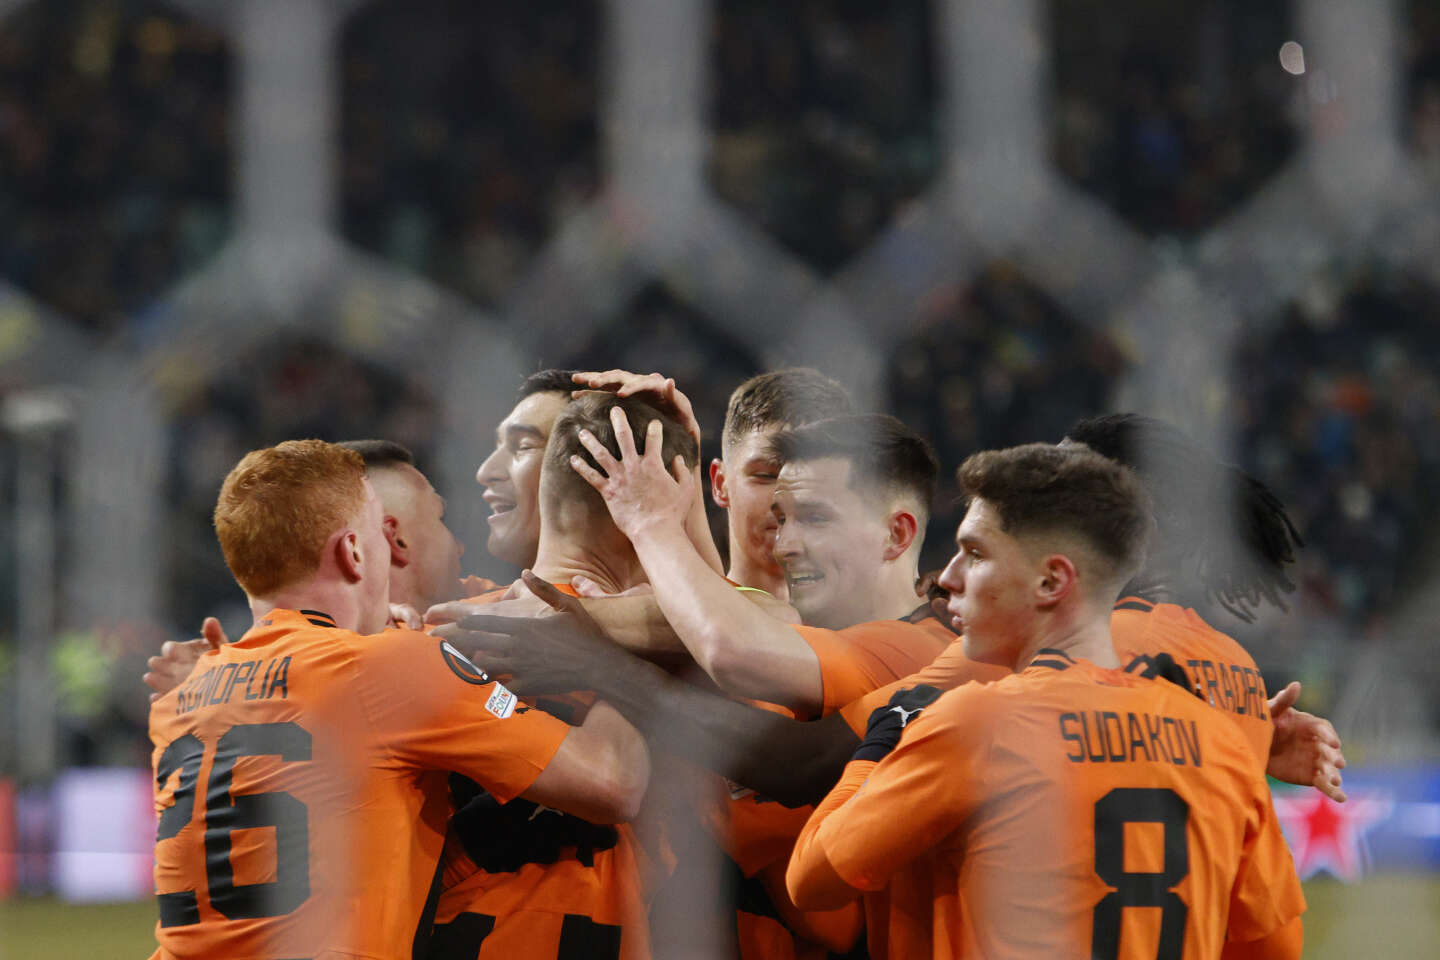 For Shakhtar Donetsk in the Champions League, representing Ukraine